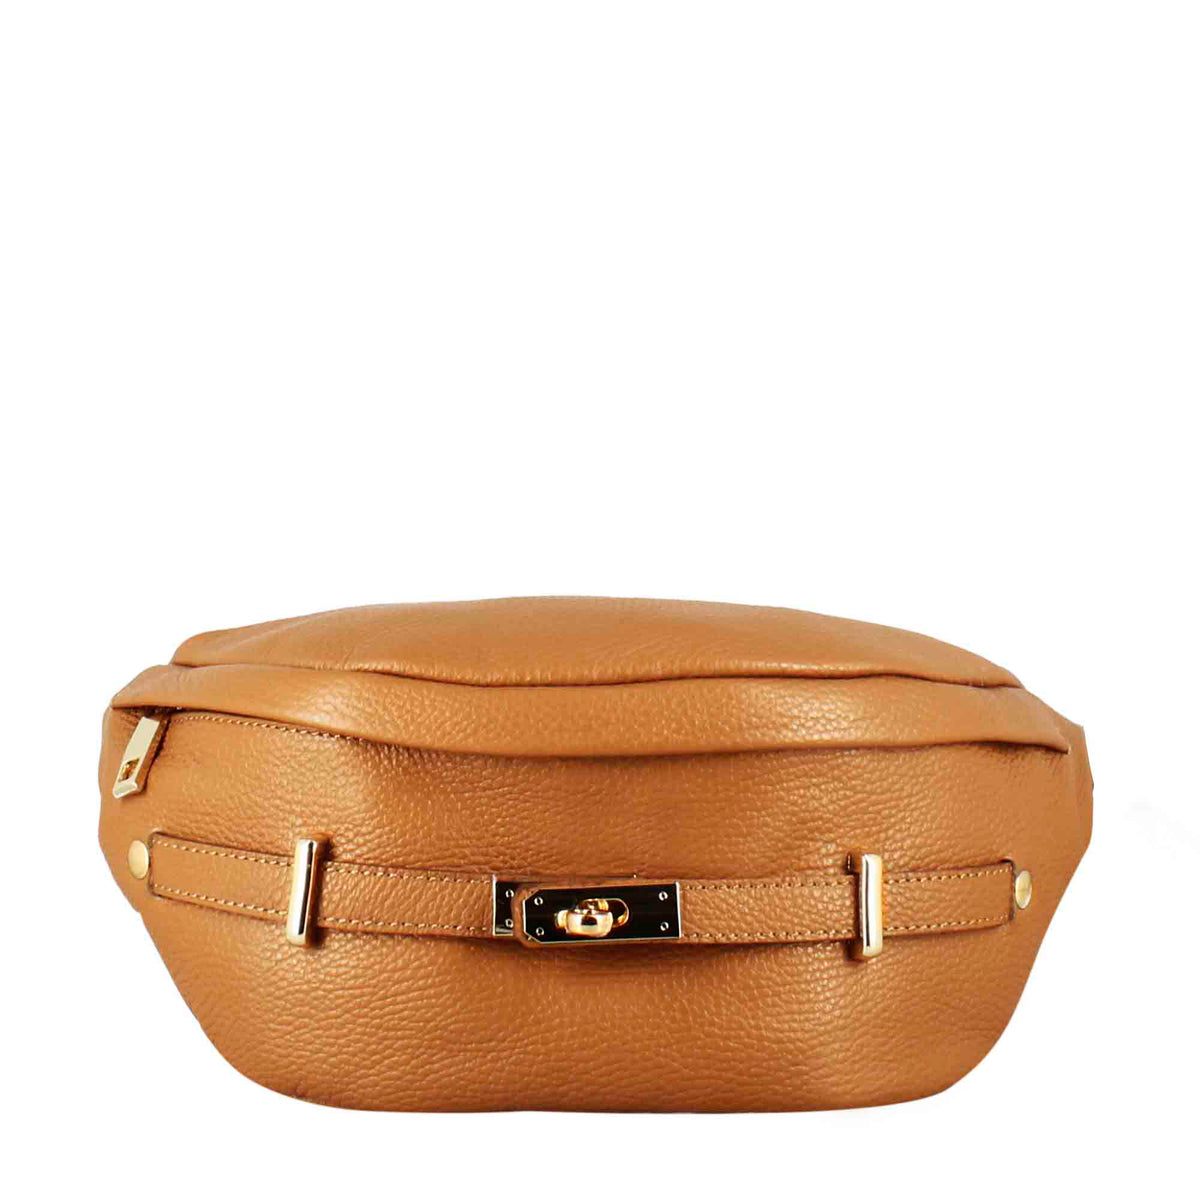 Women's casual leather fanny pack in multiple colors with gold metal details